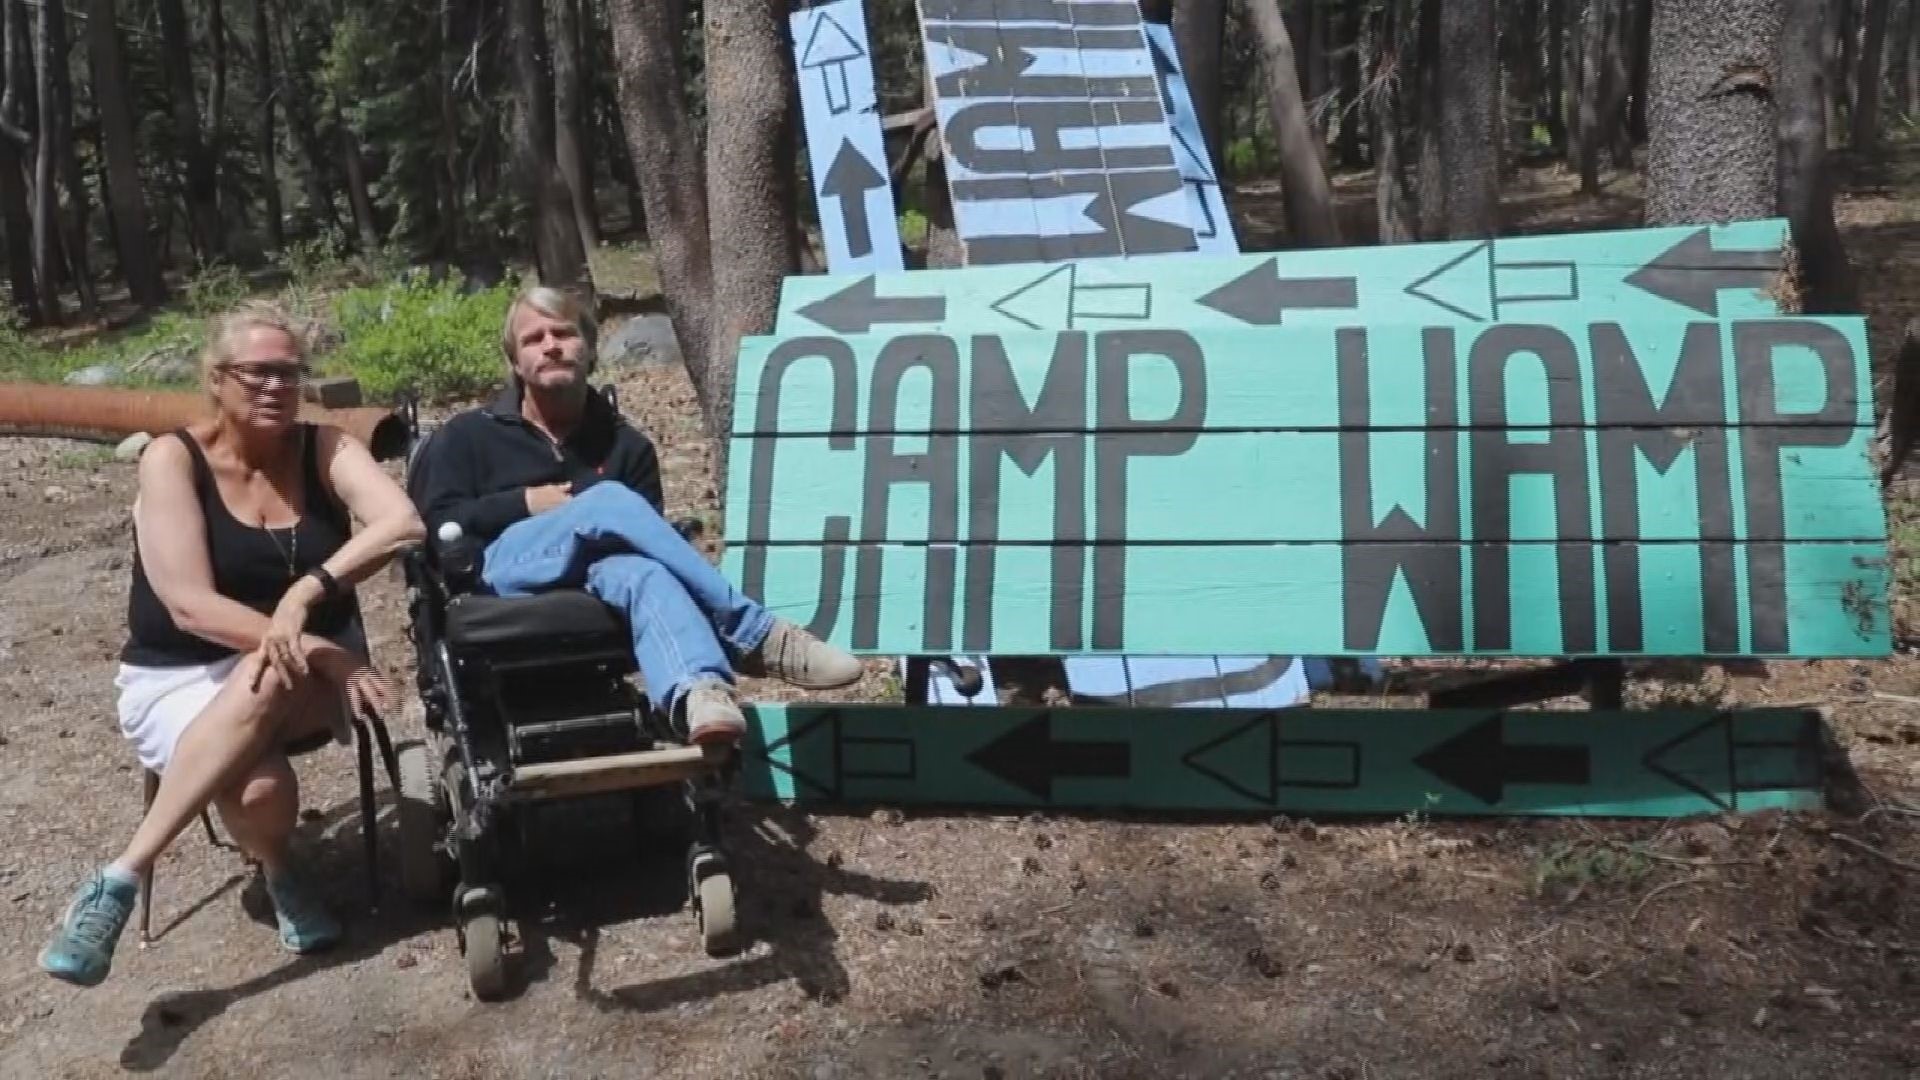 Steve Wampler of Coronado opened the camp at Deer Lake - near North Lake Tahoe - to help children living with disabilities have a full camp experience.